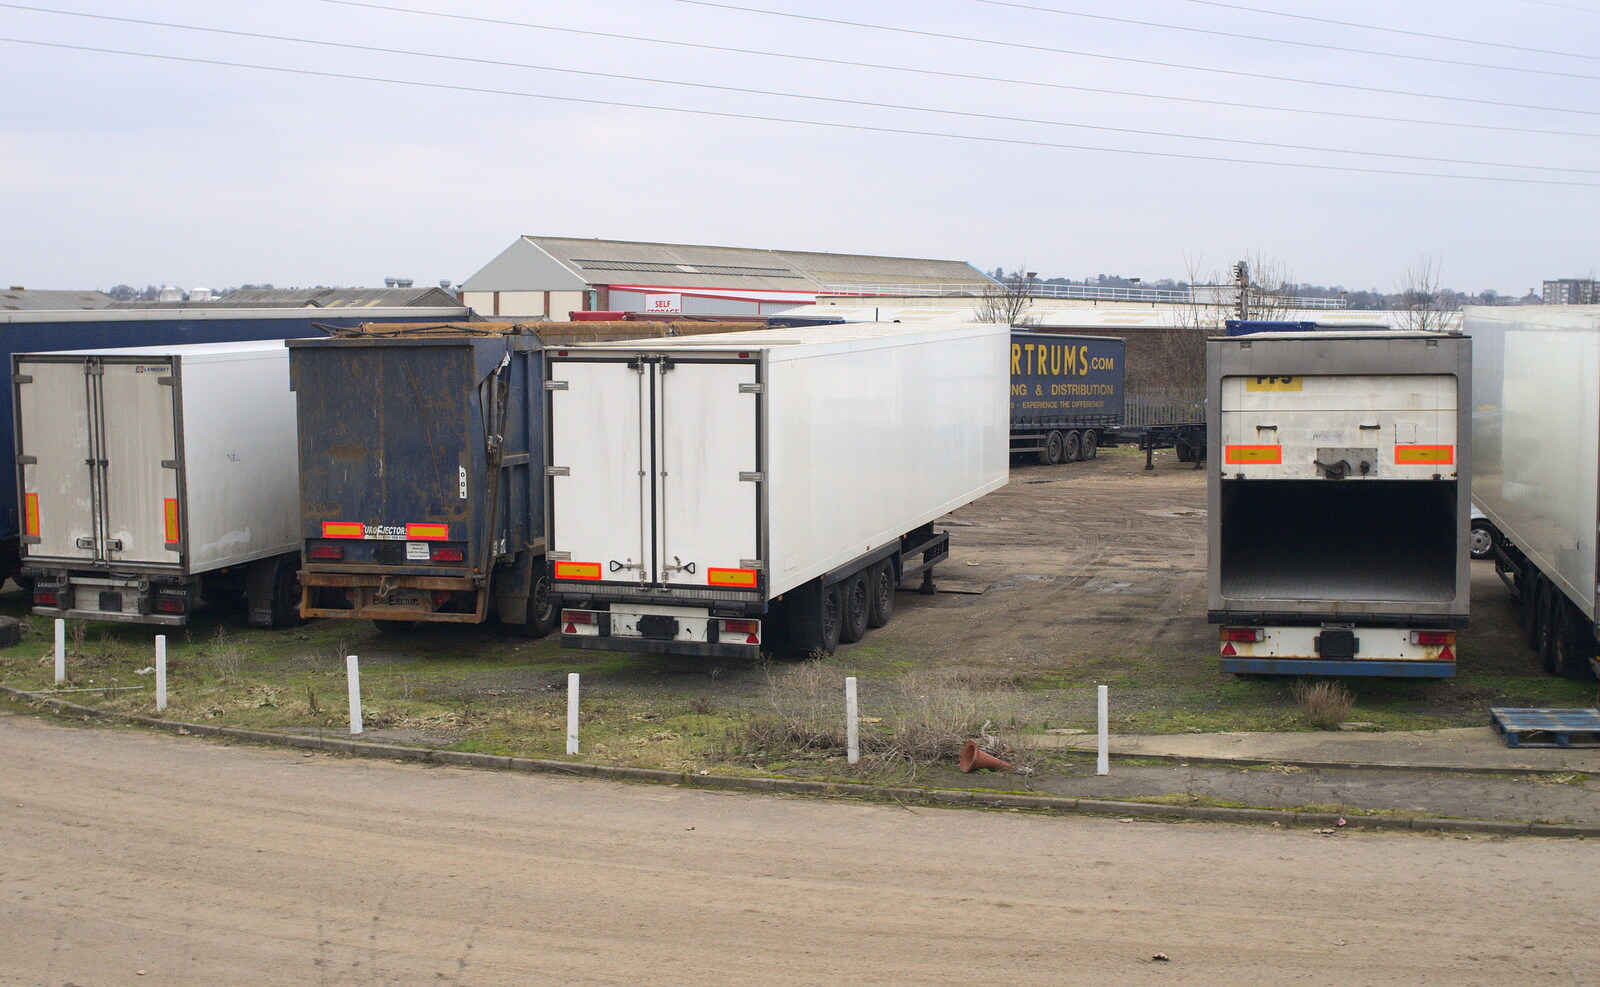 A load of derelict lorry trailers from The Demolition of the Bacon Factory, Ipswich, Suffolk - 20th February 2013